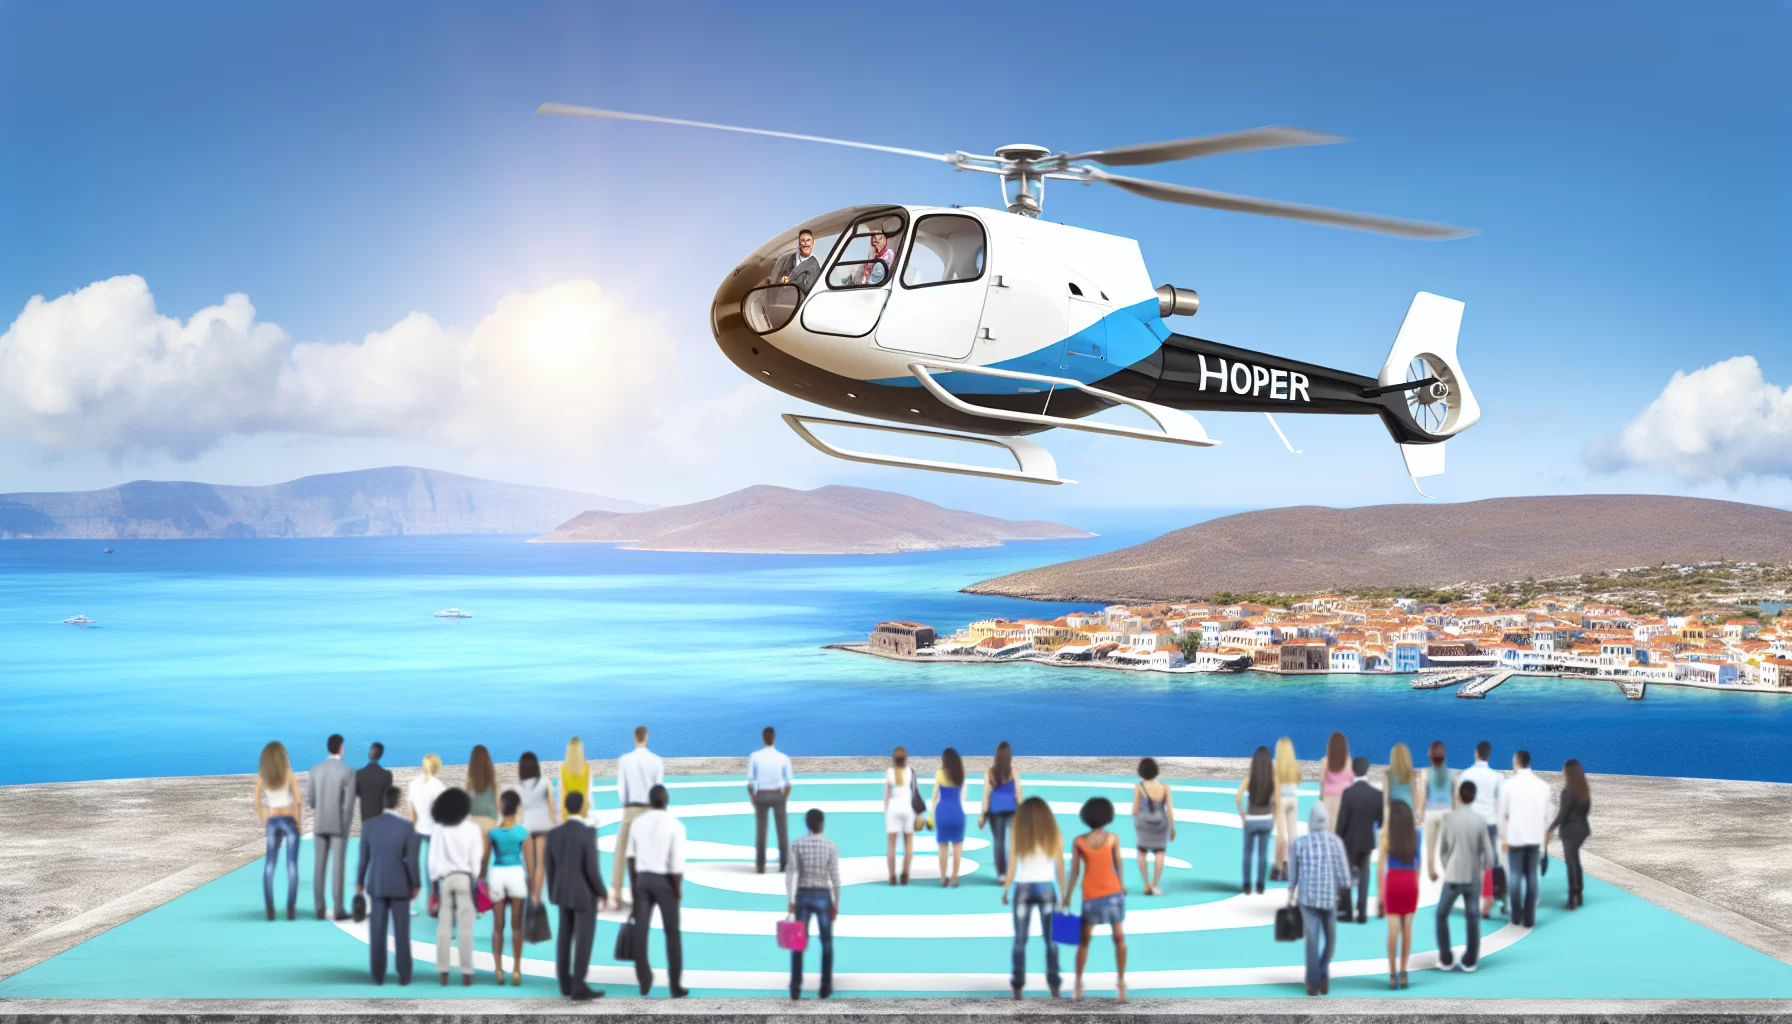 Hoper launches Greece's first scheduled helicopter airline: a game-changer in travel and tourism